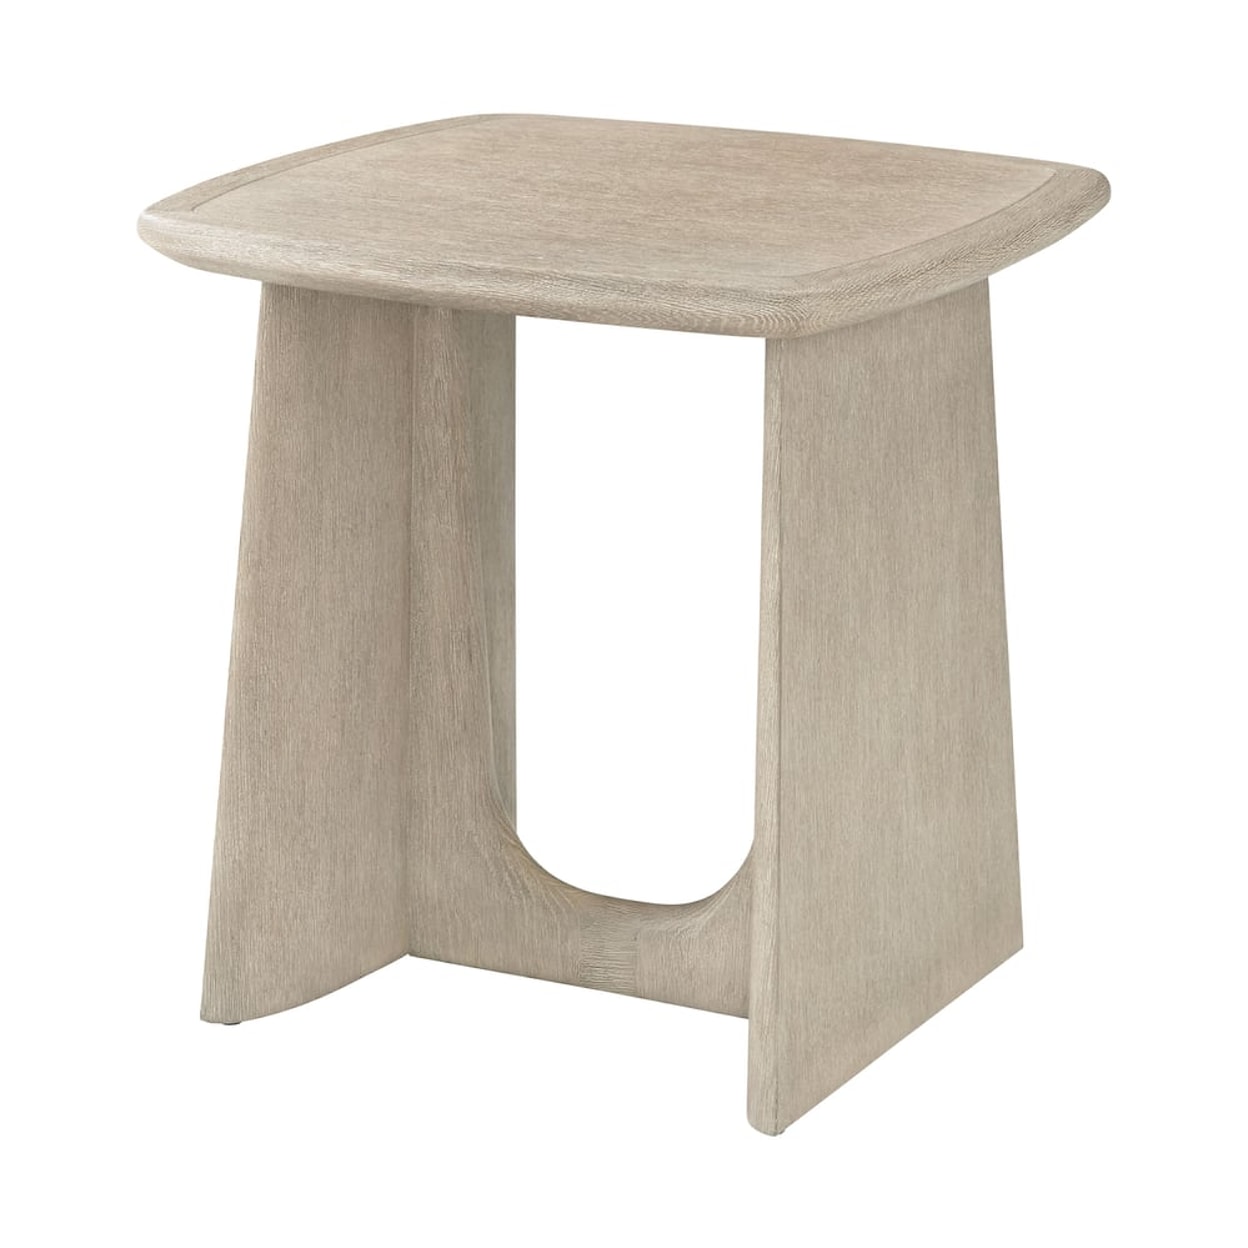 Theodore Alexander Repose Square Side Table 